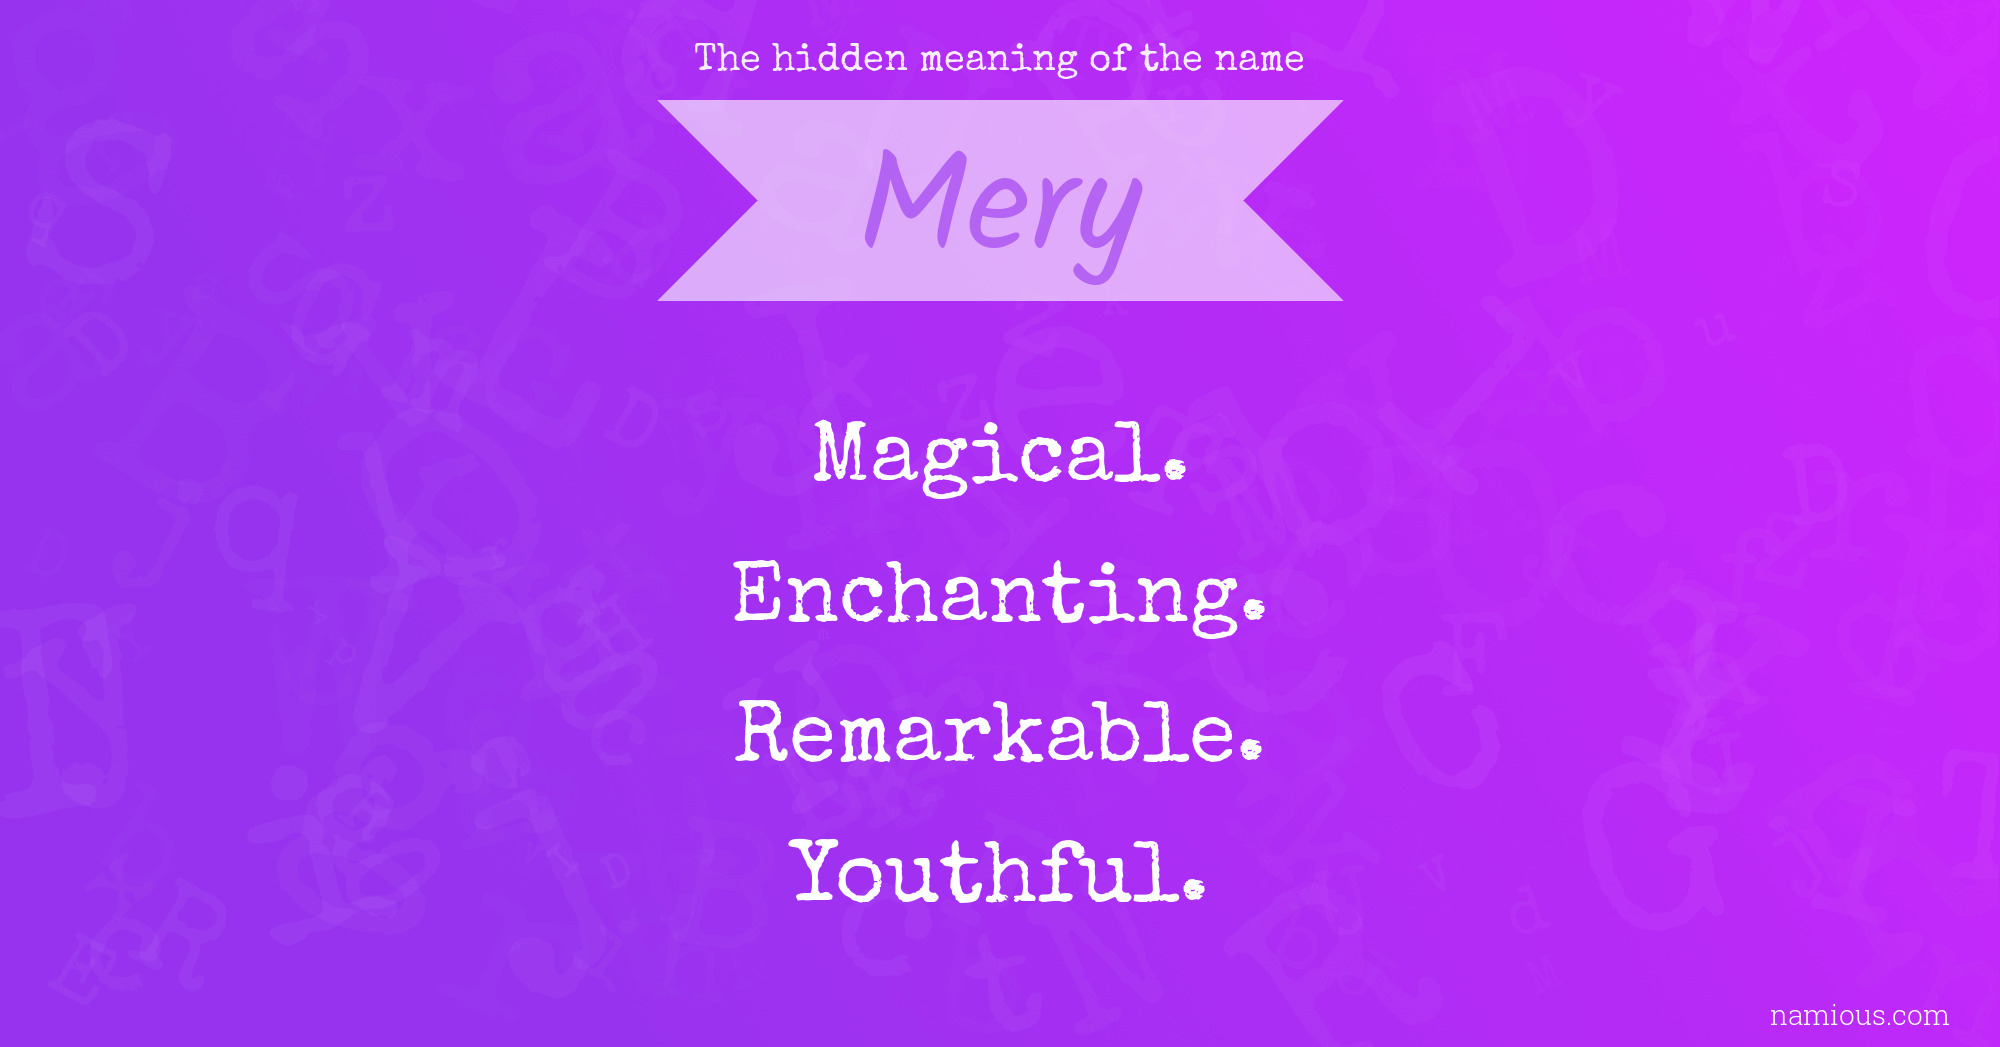 The hidden meaning of the name Mery